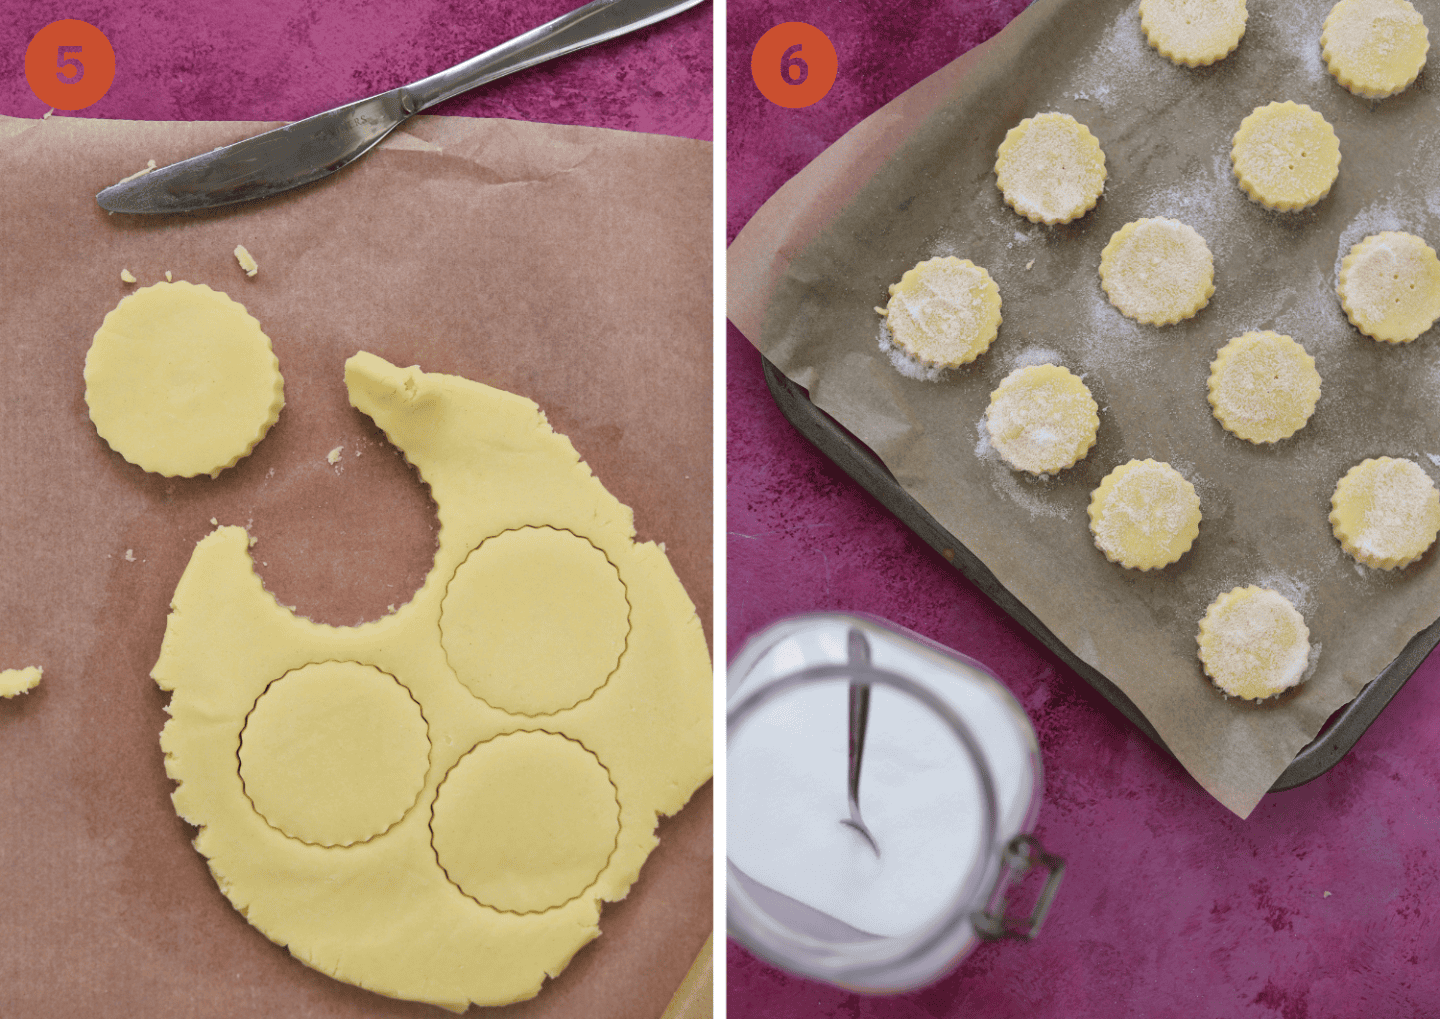 Cut circle shapes from the shortbread dough and then sprinkle with sugar.